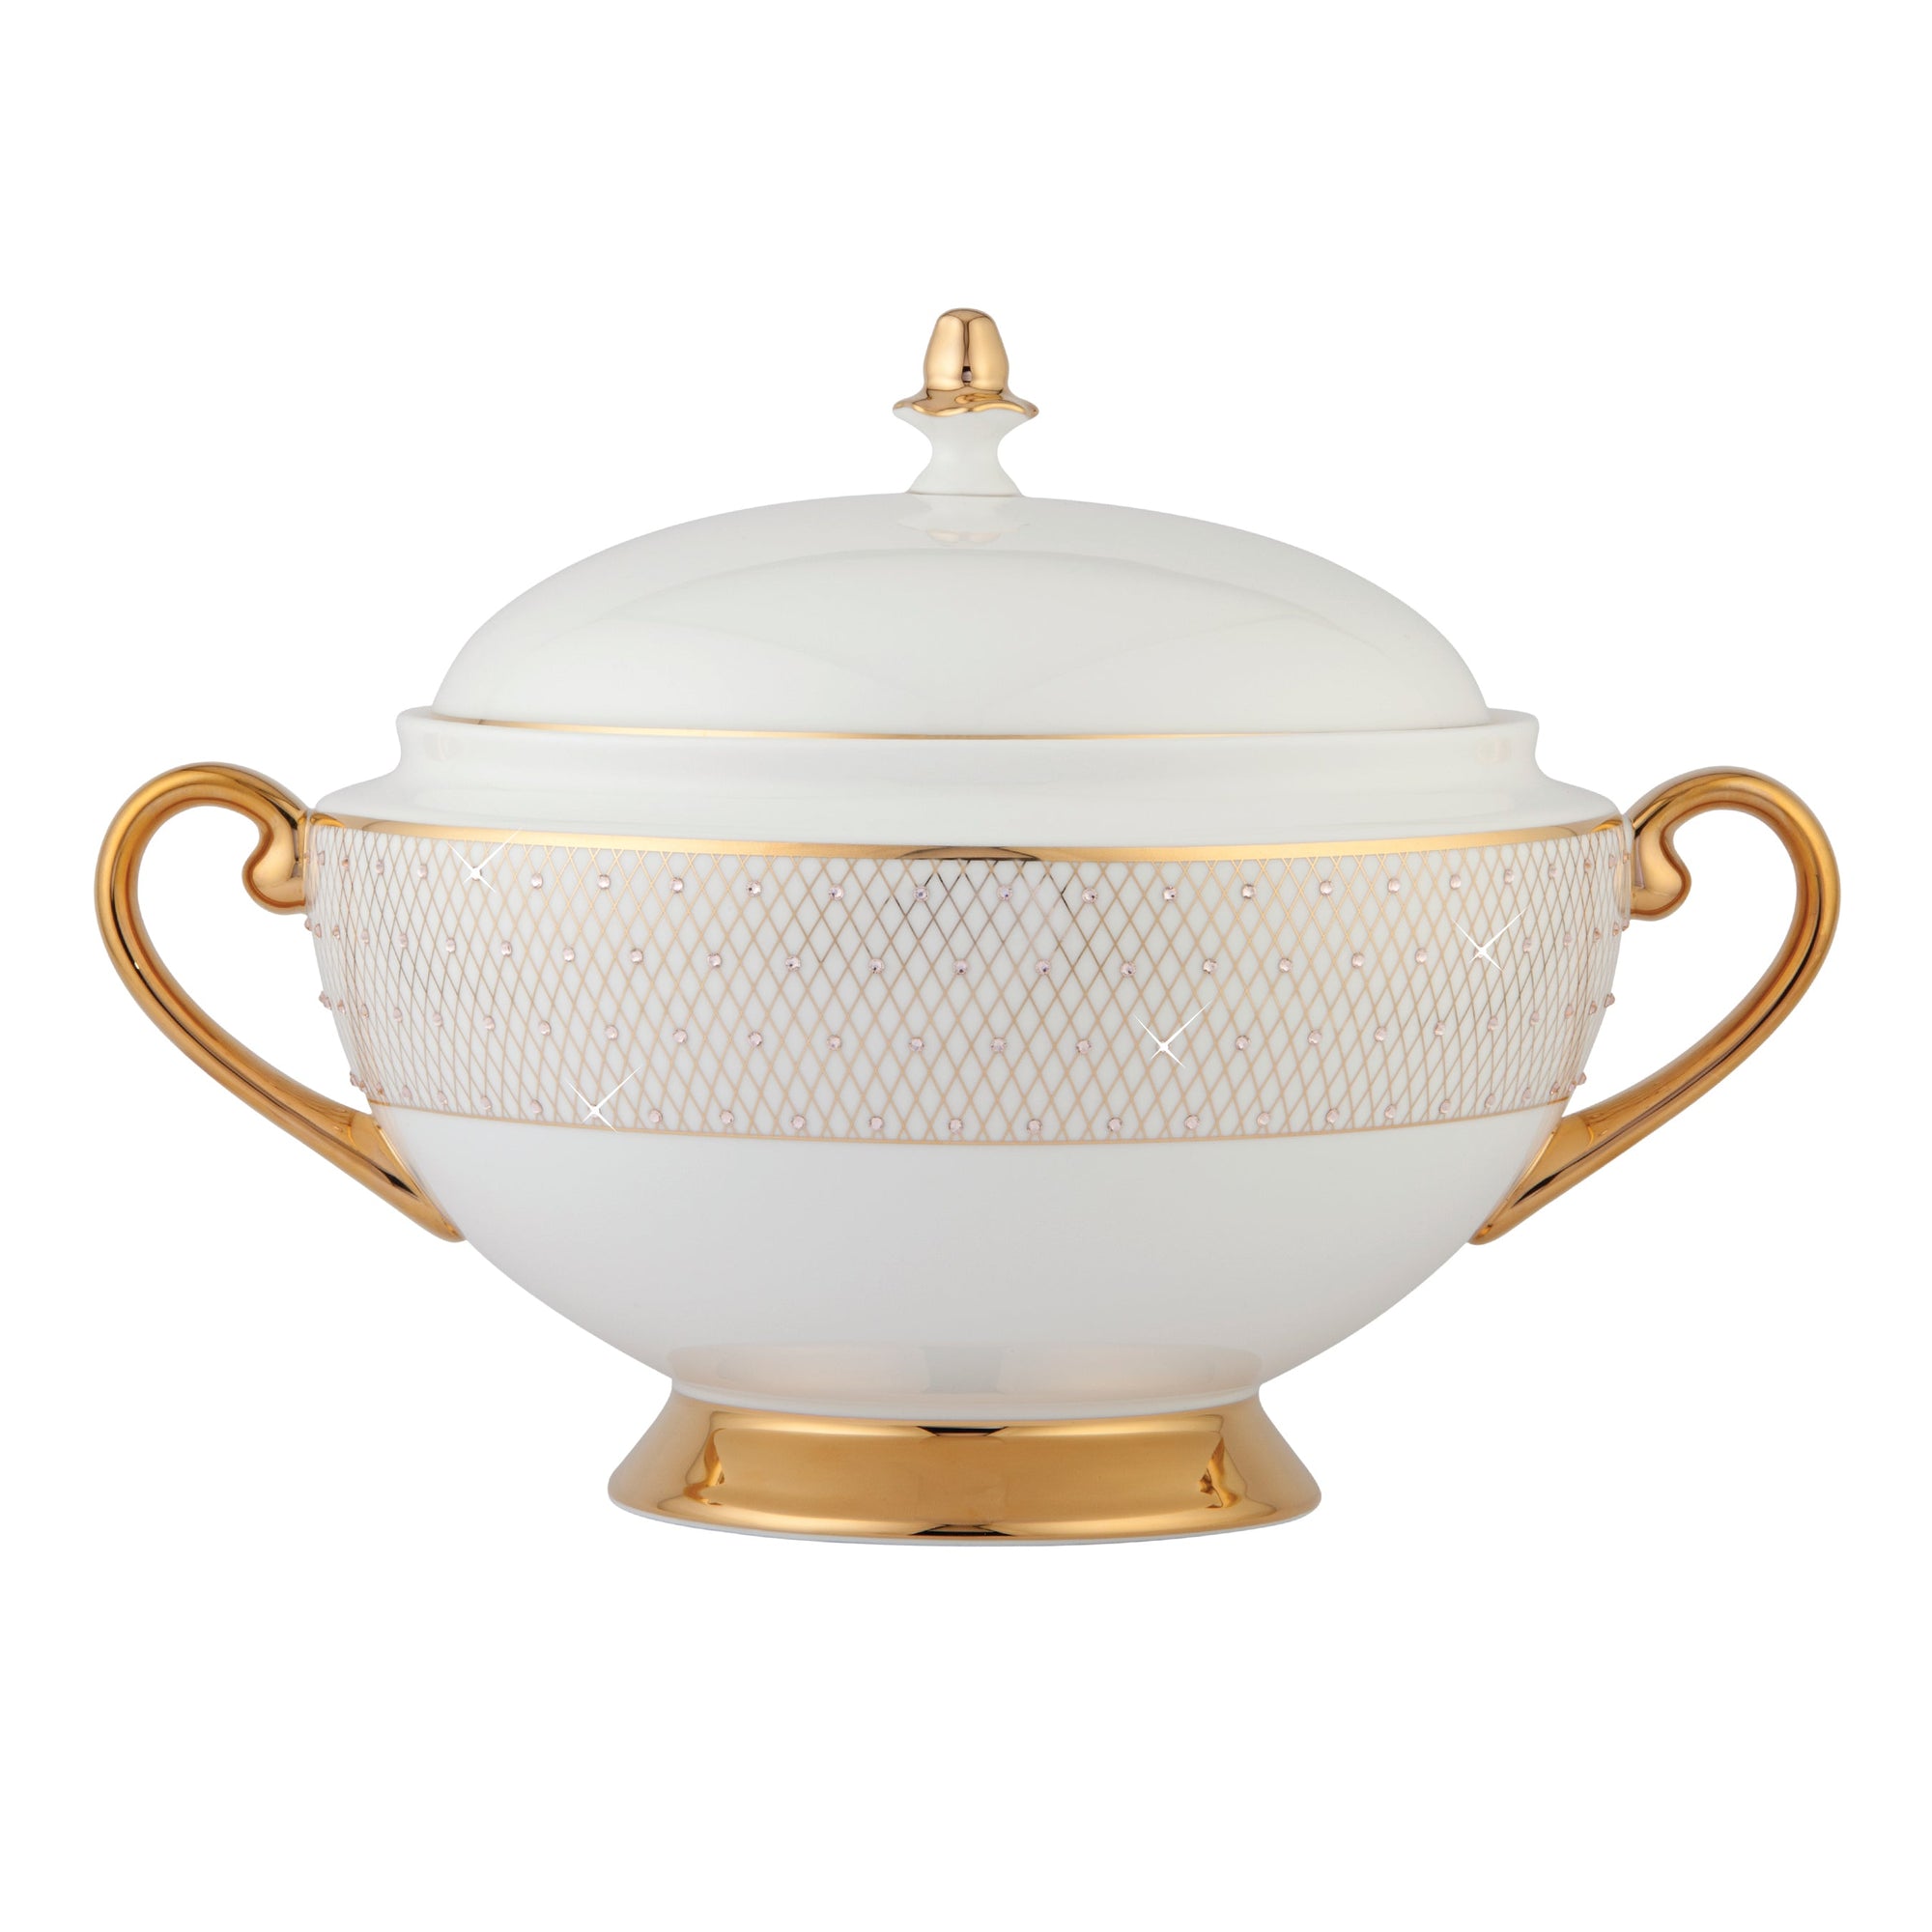 Prouna Princess Gold Covered Vegetable Bowl / Soup Tureen White Background Photo